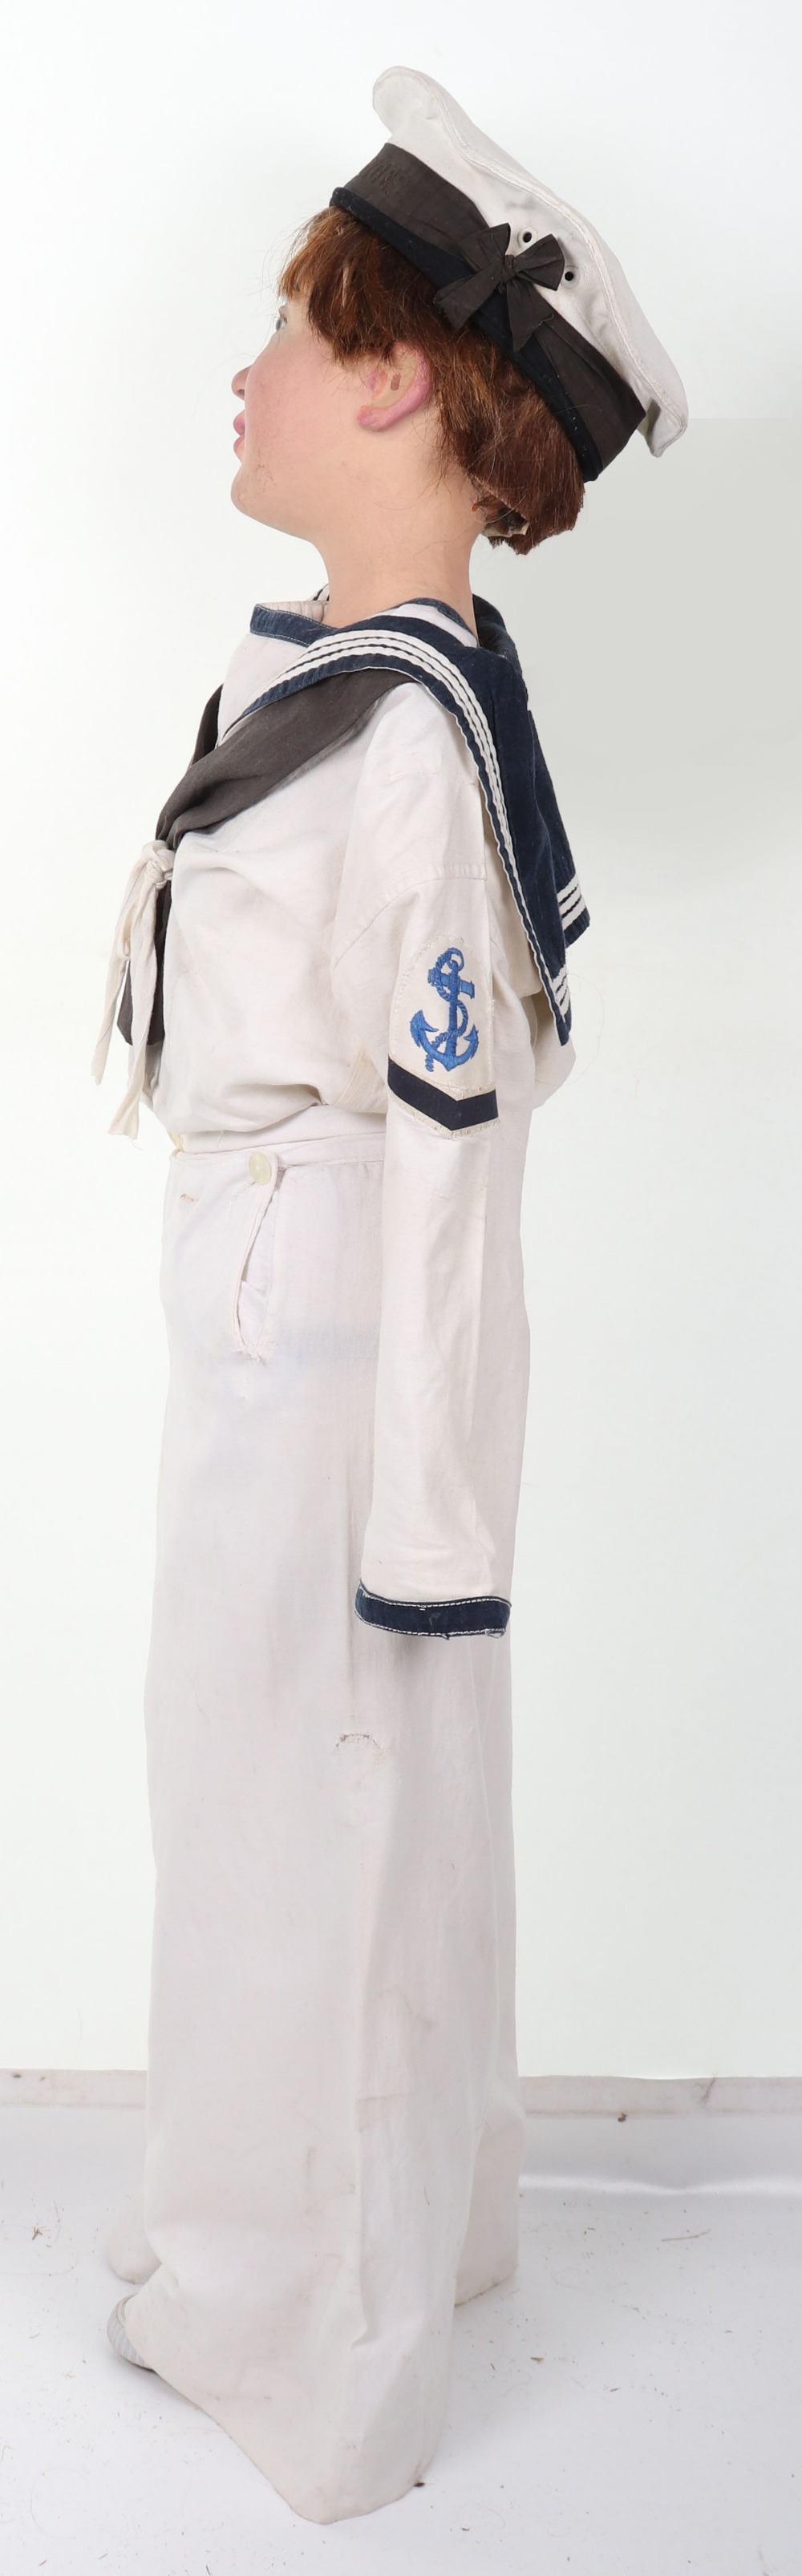 Edwardian / WW1 Period Royal Naval Uniform for a Child - Image 9 of 10